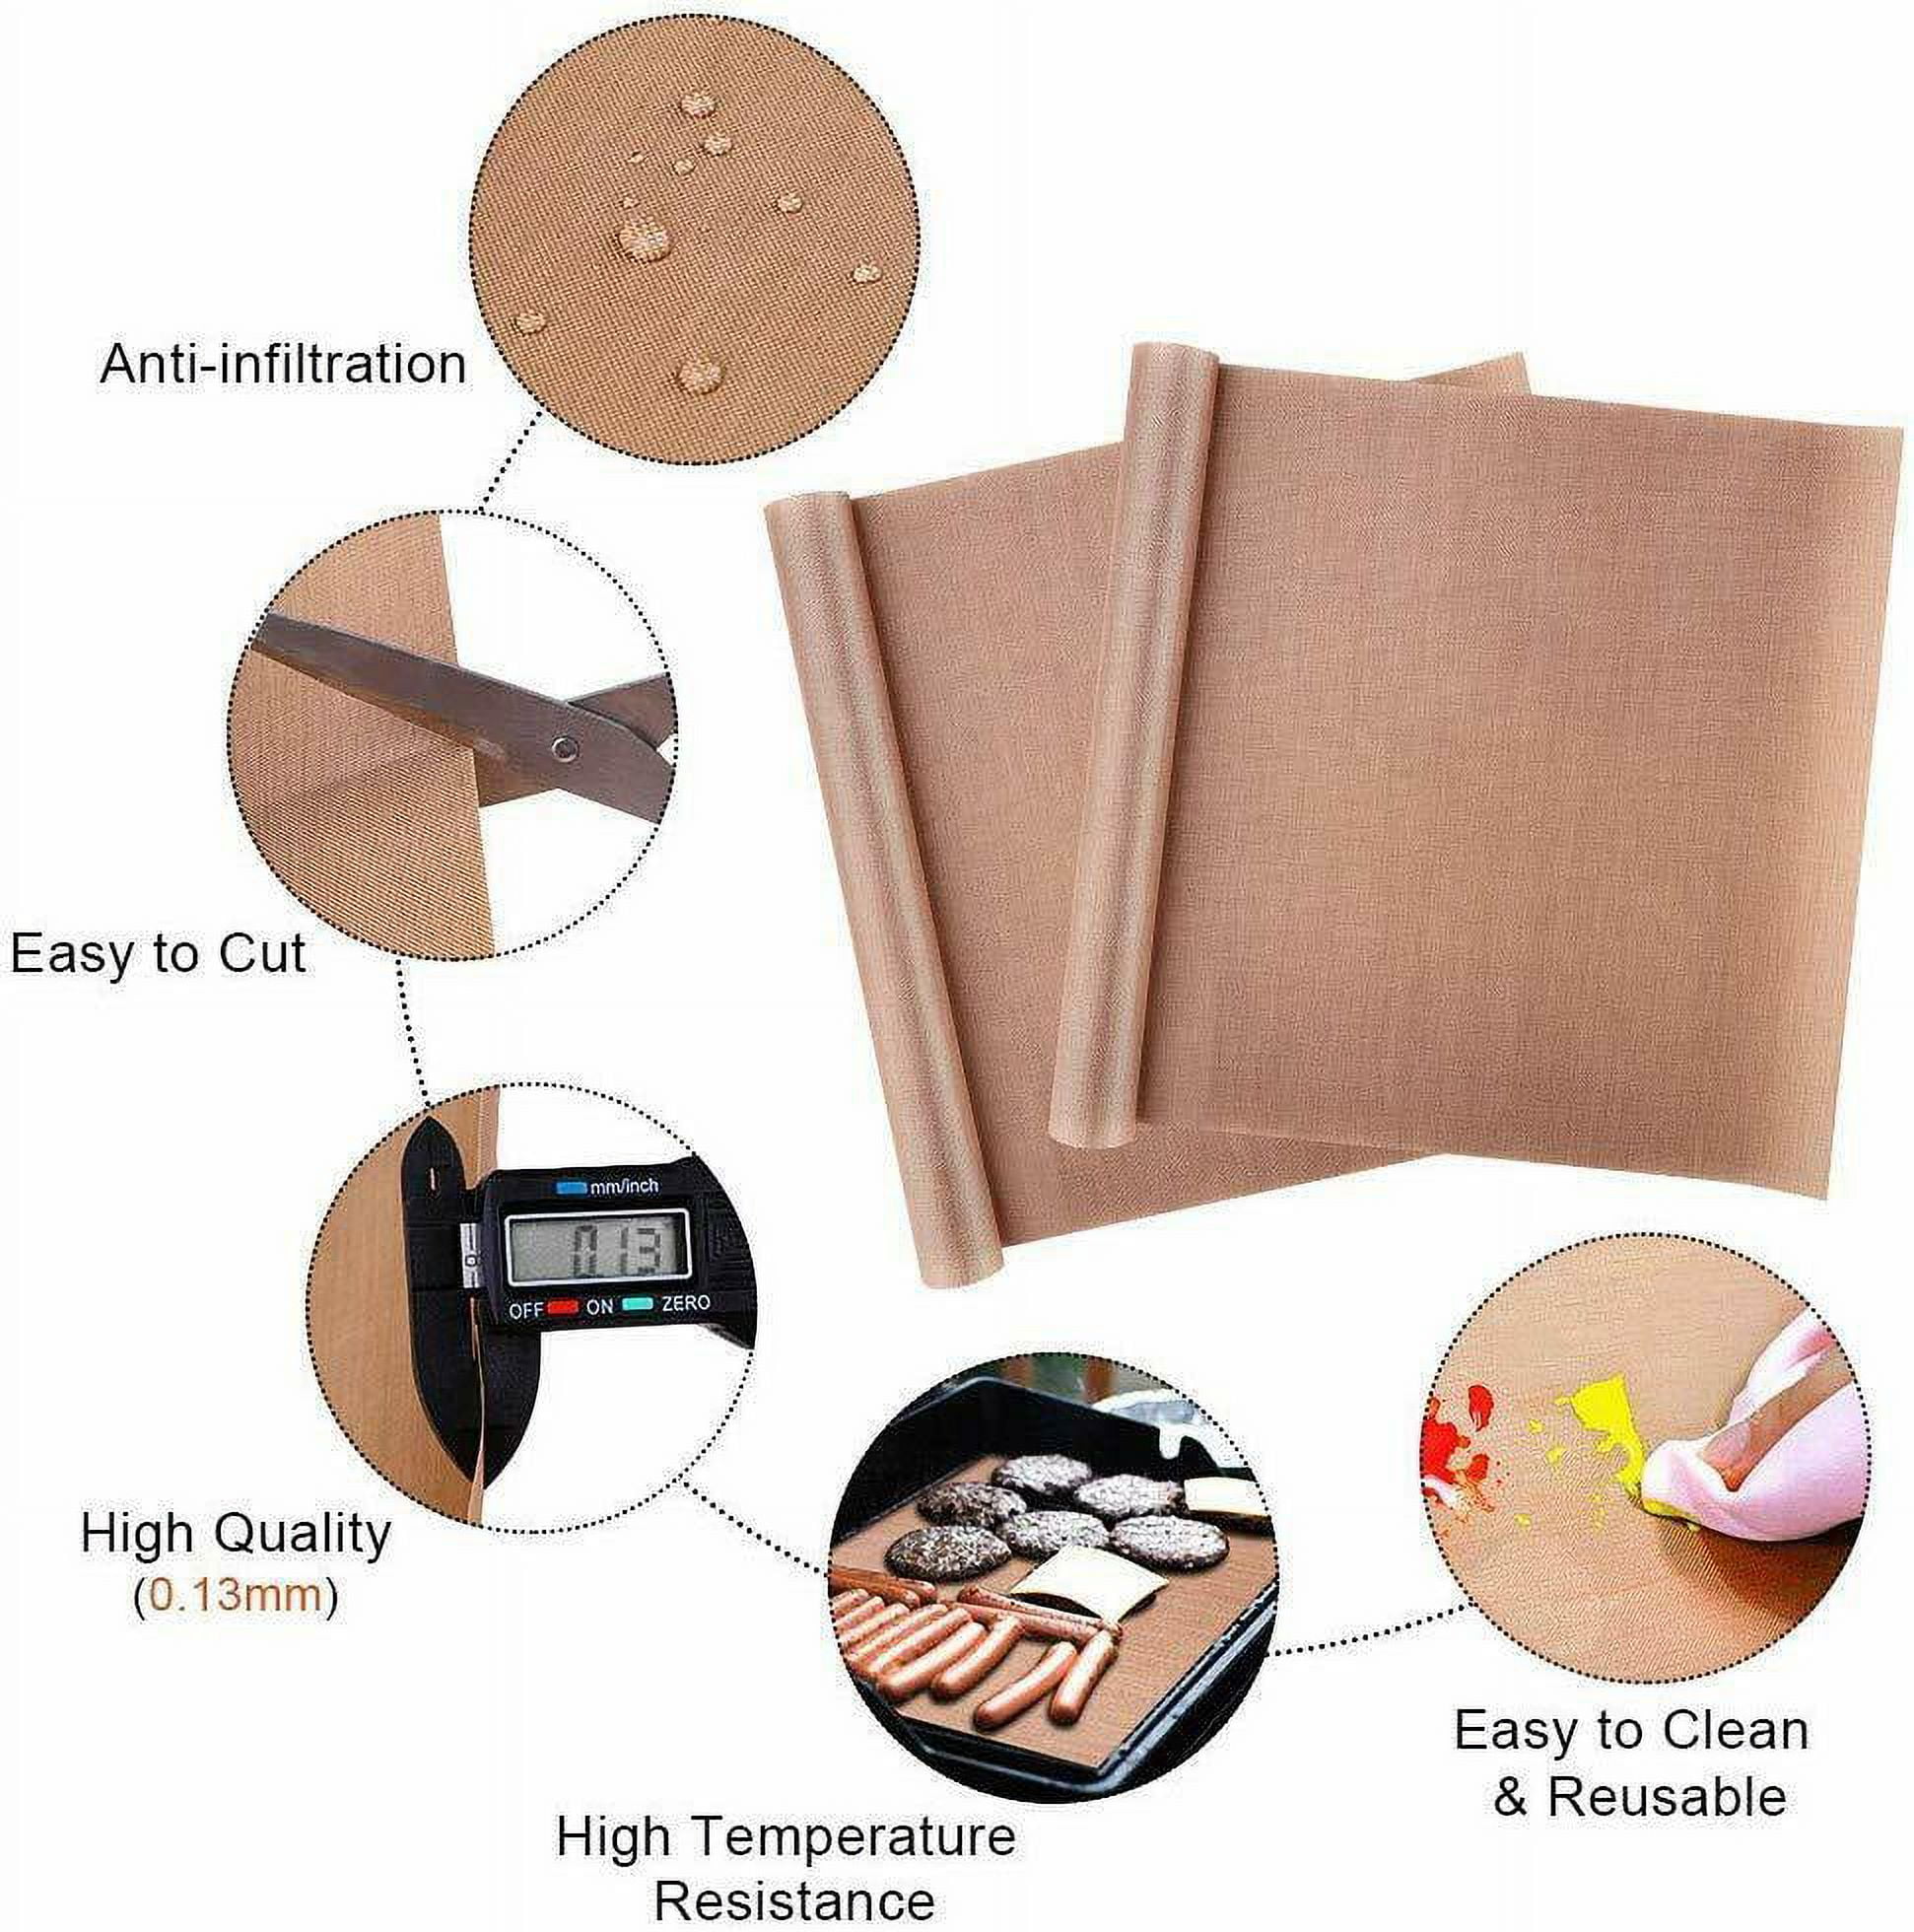  Akblaklsa 5 Pack Teflon Sheets for Baking, 12×16 Inch Reusable  Baking Sheet Liners for Heat Press Transfer Sheet, Heat Resistant,  Non-stick, Reusable, Cuttable, Good Choice for Heat Press and Baking: Home